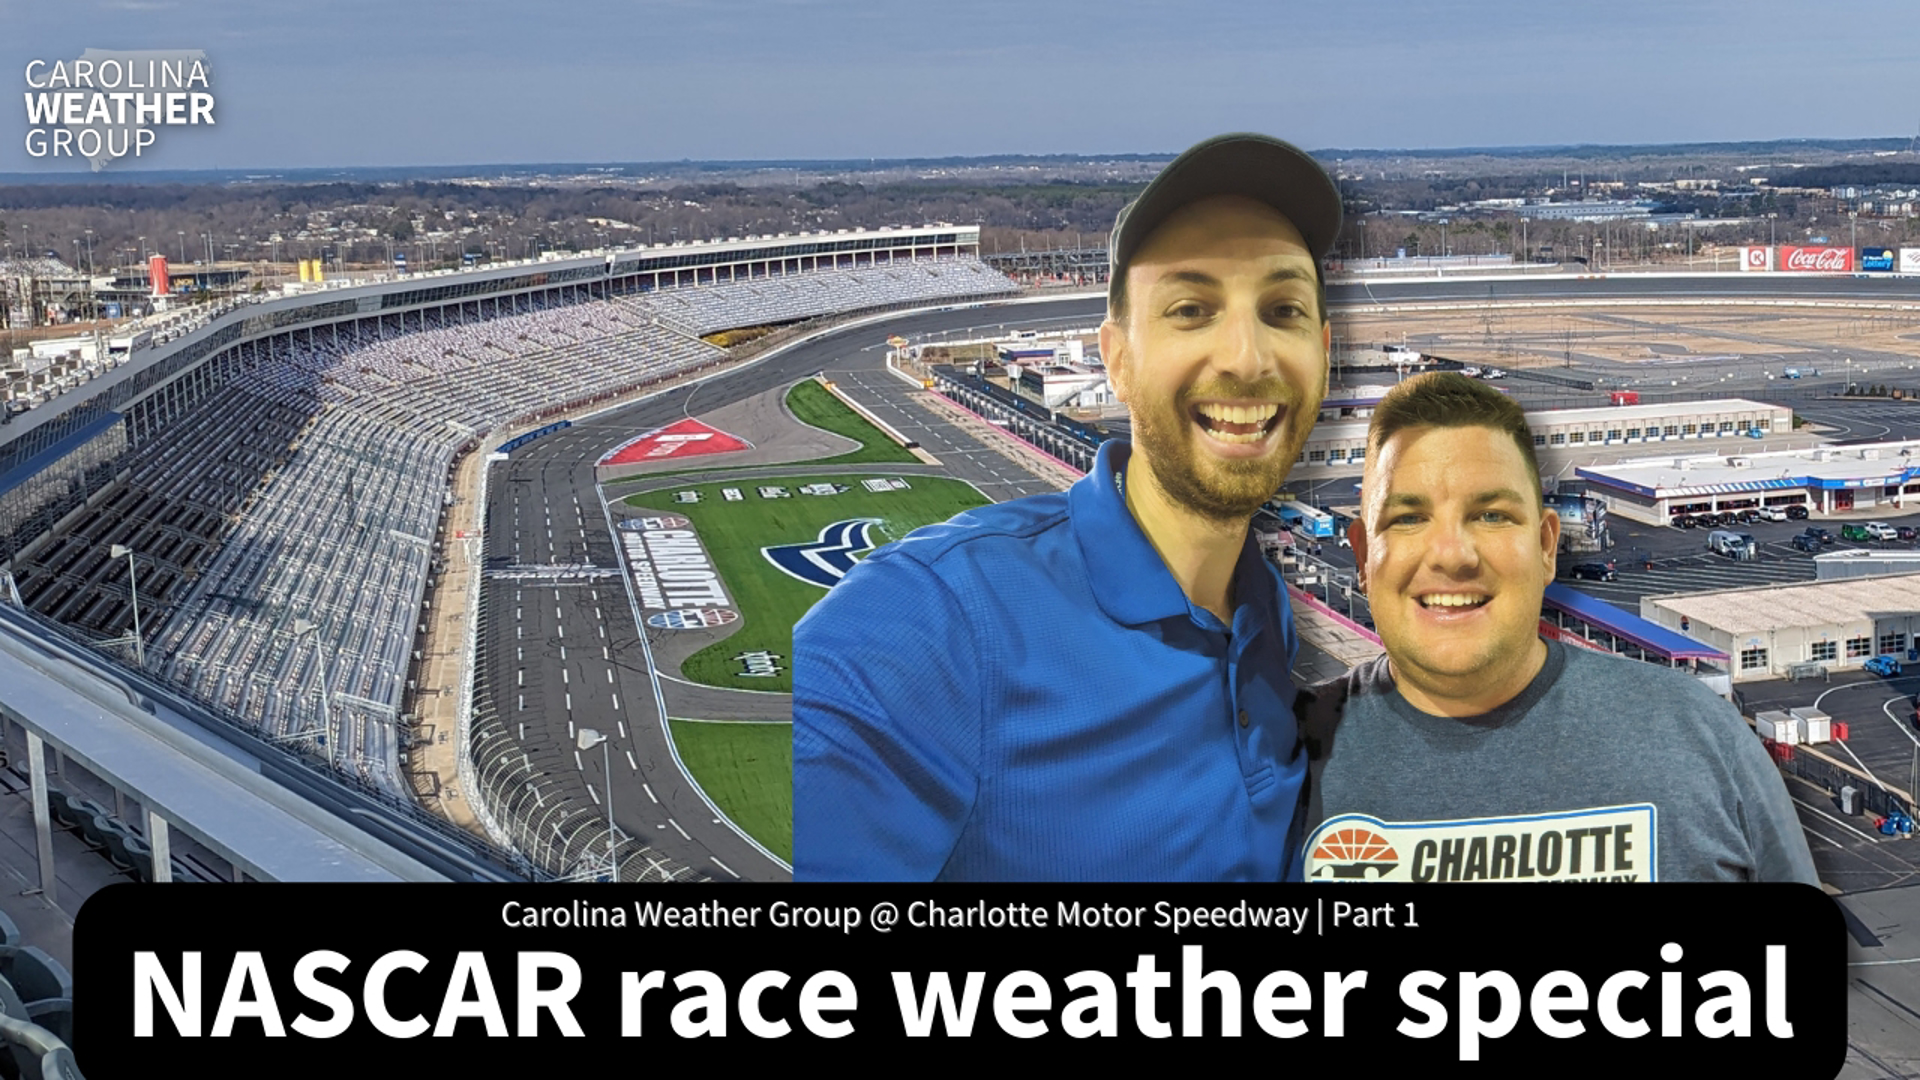 Carolina Weather Group podcast is at Charlotte Motor Speedway, where a coastal storm could impact the running of NASCAR races.